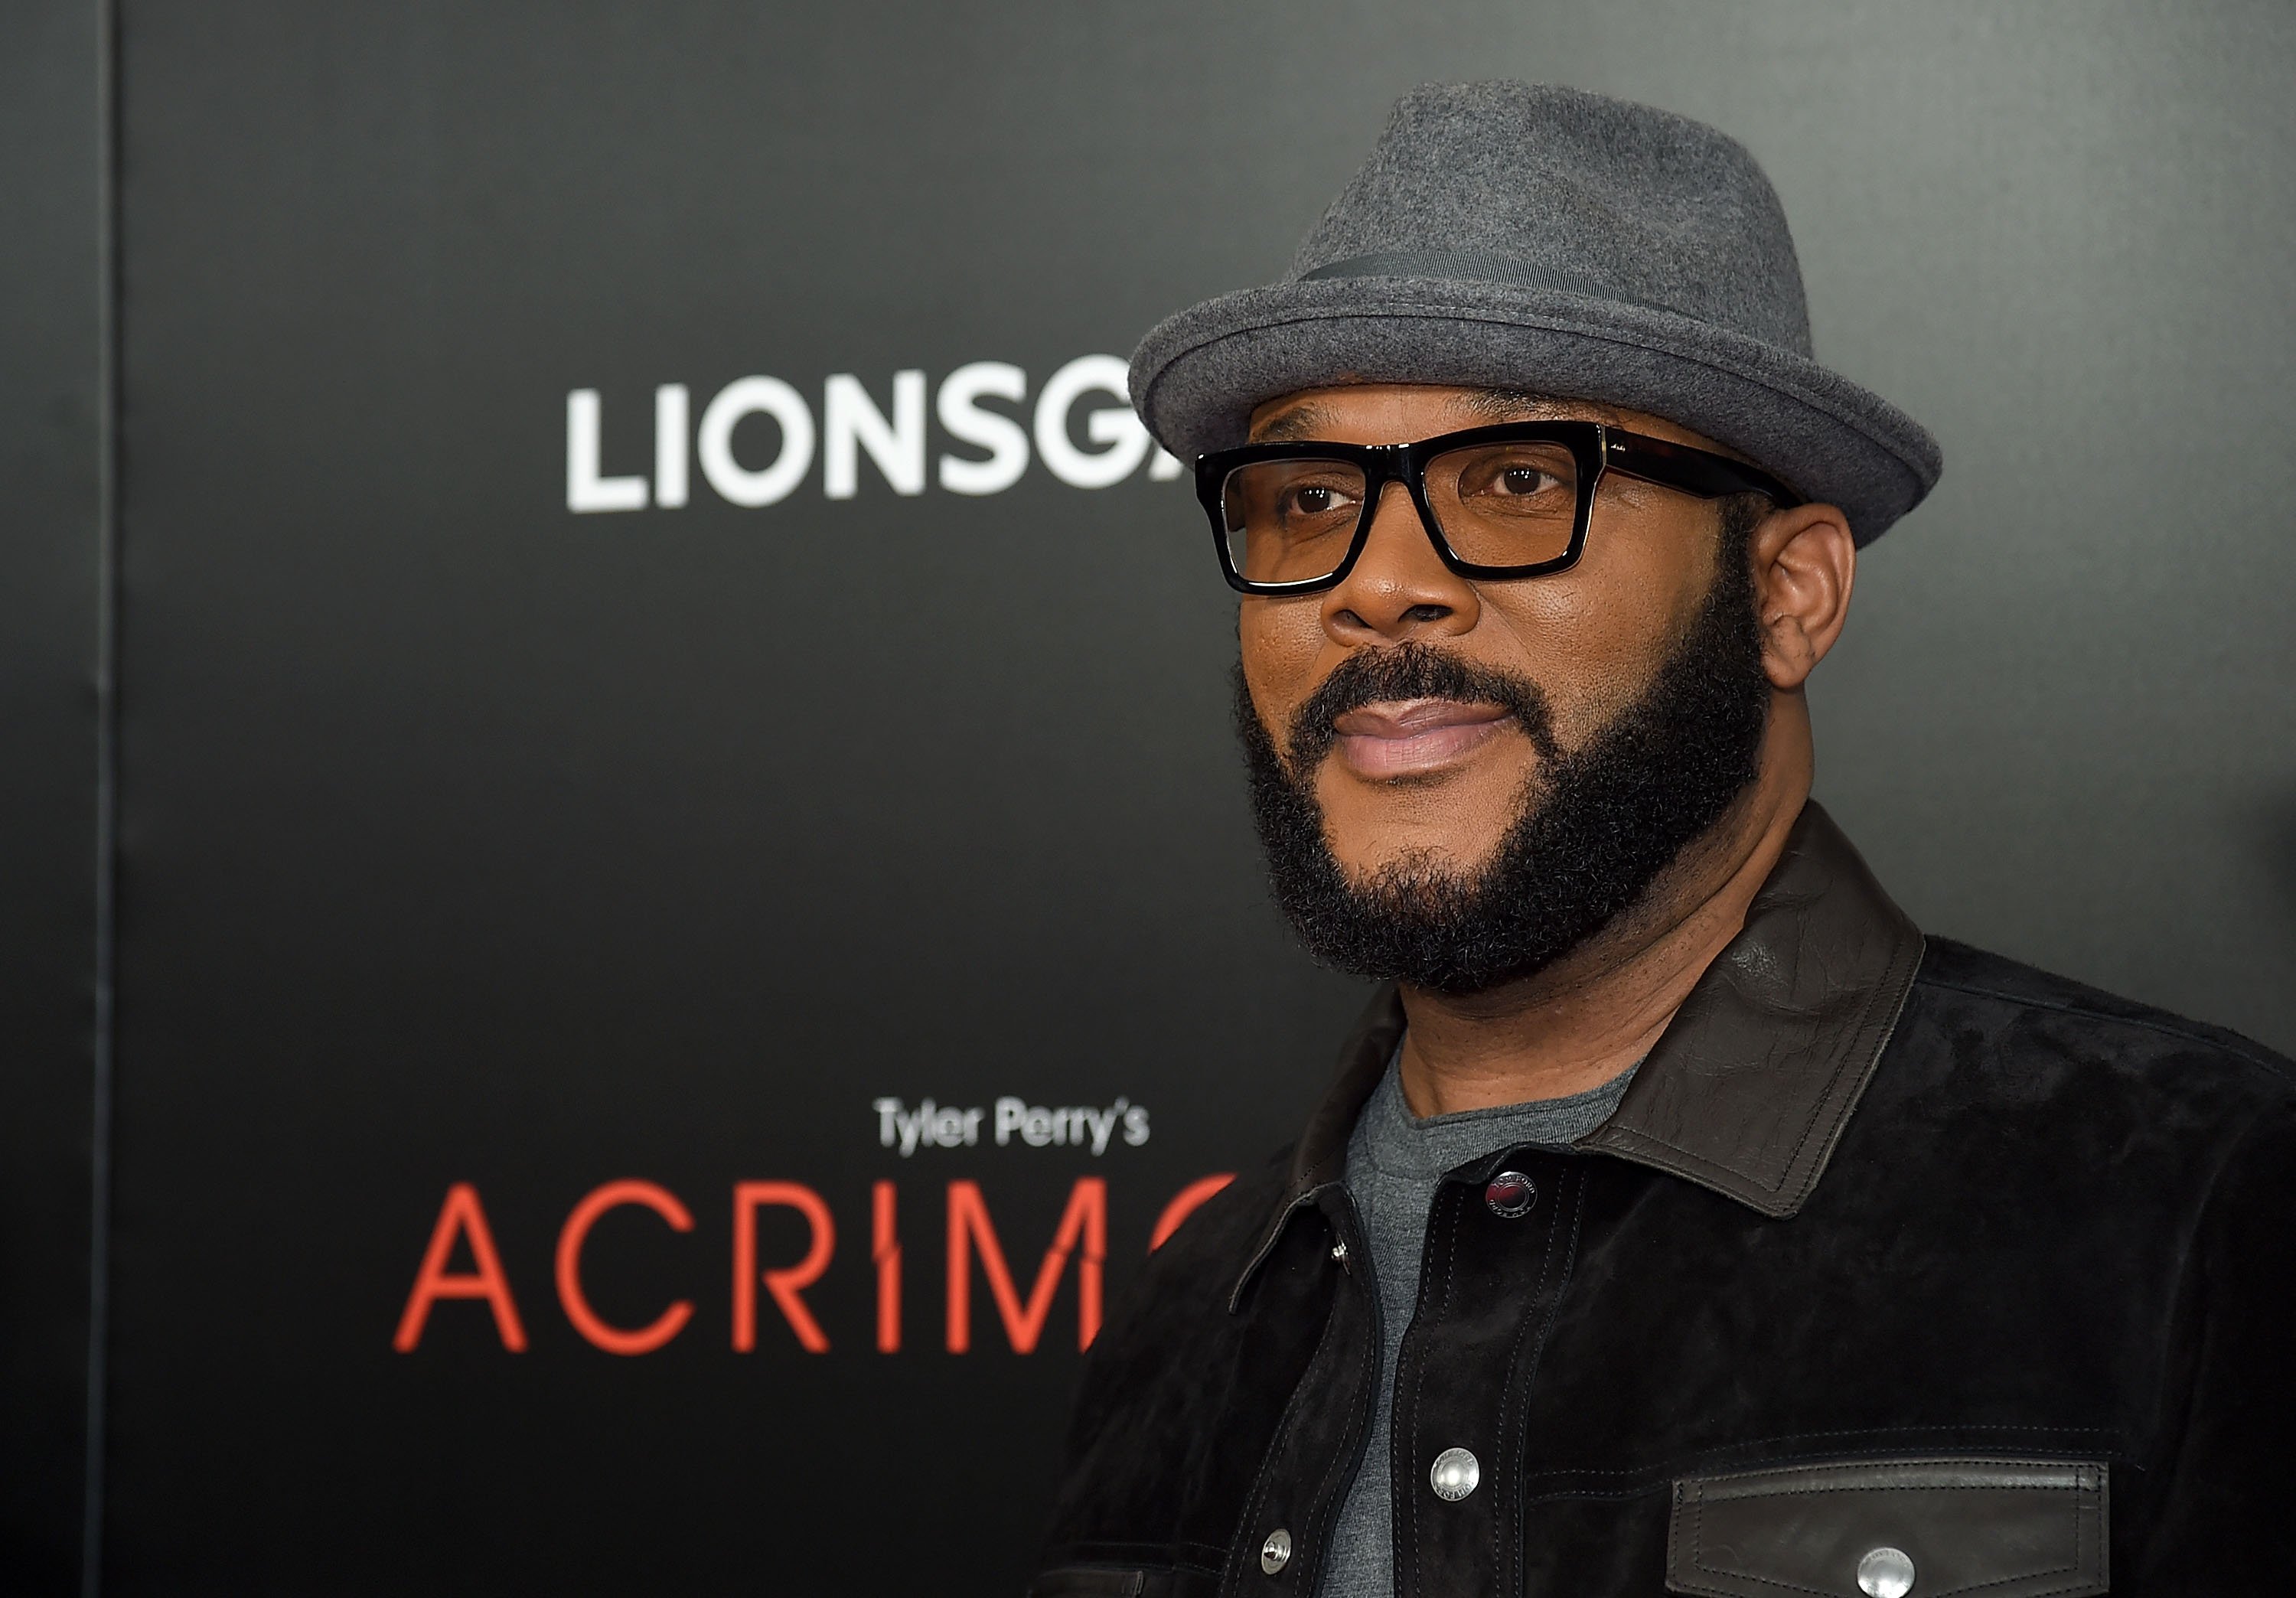 Tyler Perry attends the "Acrimony" New York Premiere on March 27, 2018 | Photo: GettyImages